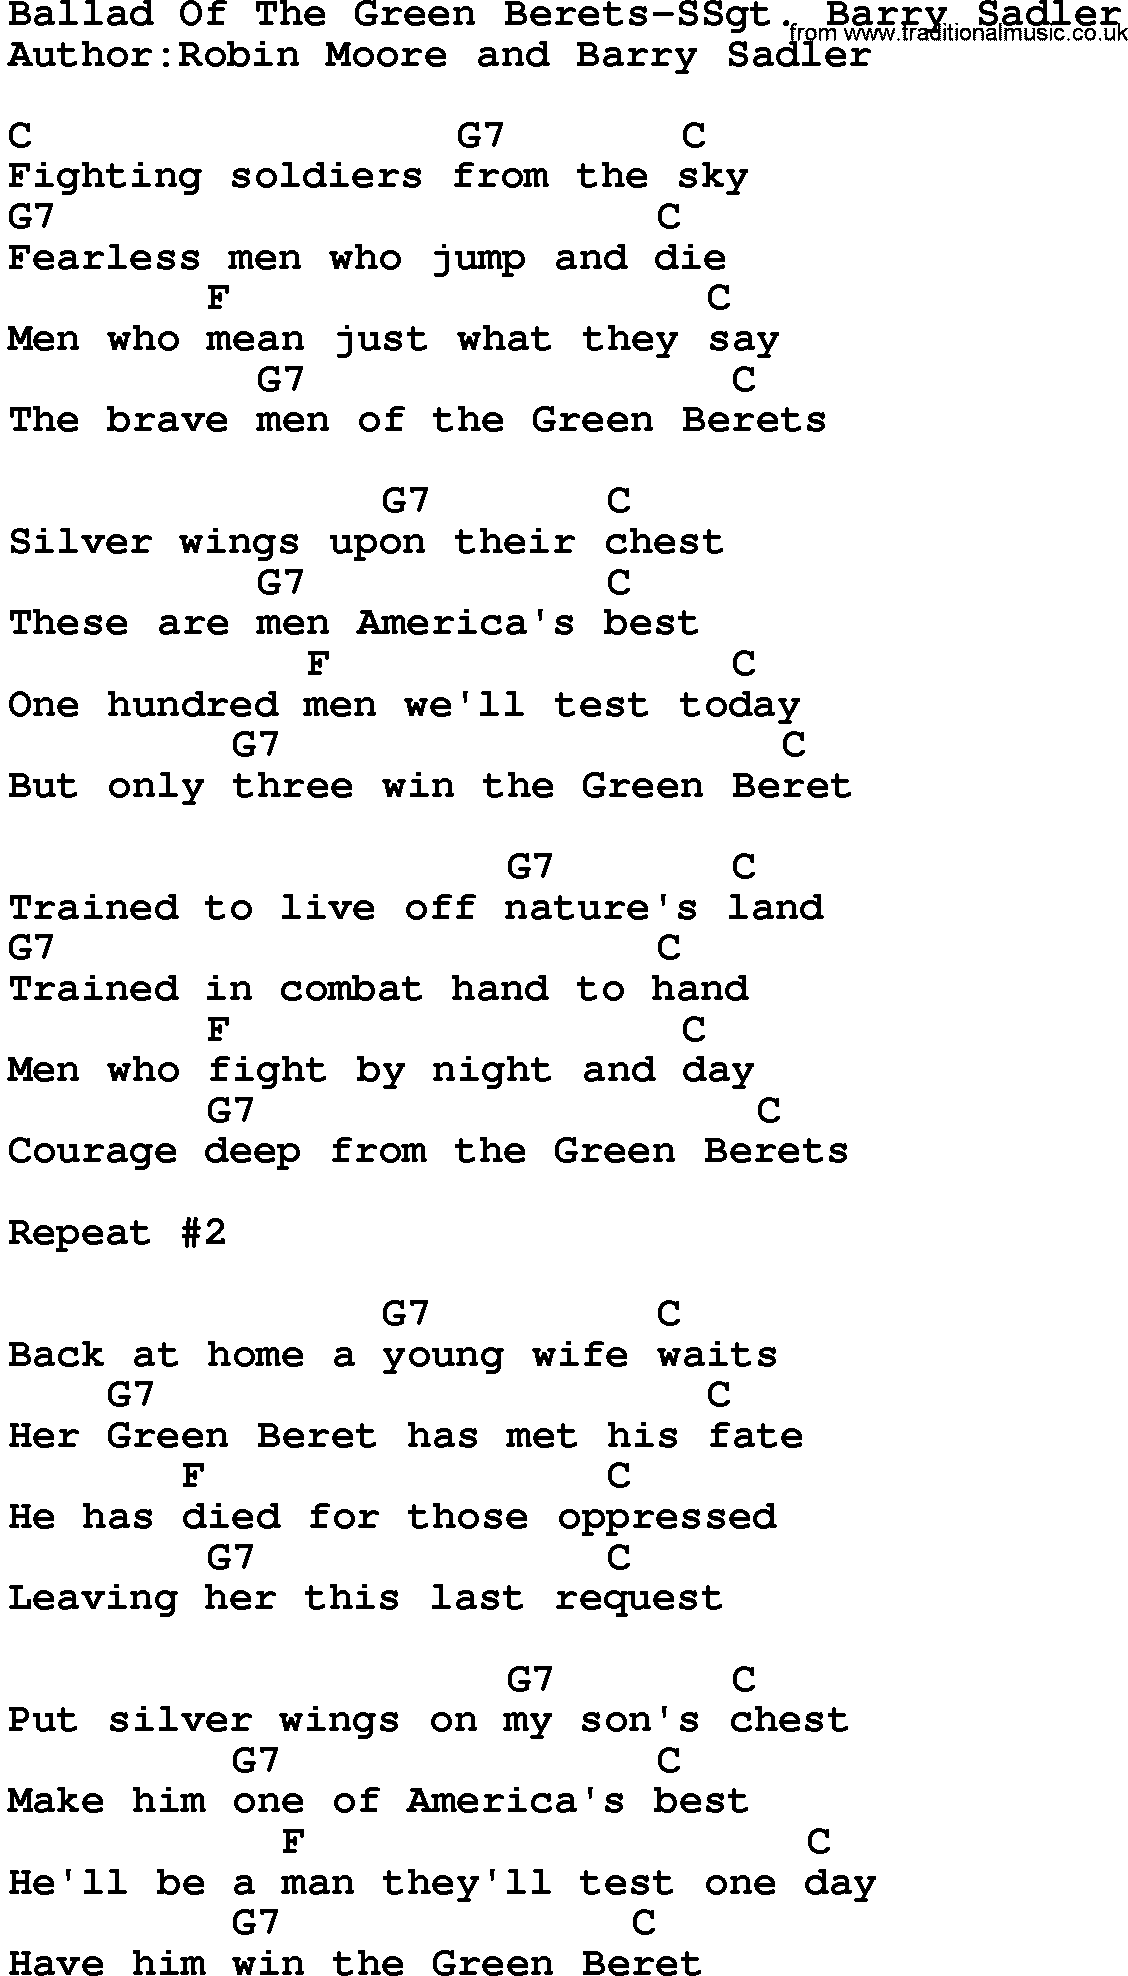 Country music song: Ballad Of The Green Berets-Ssgt Barry Sadler lyrics and chords